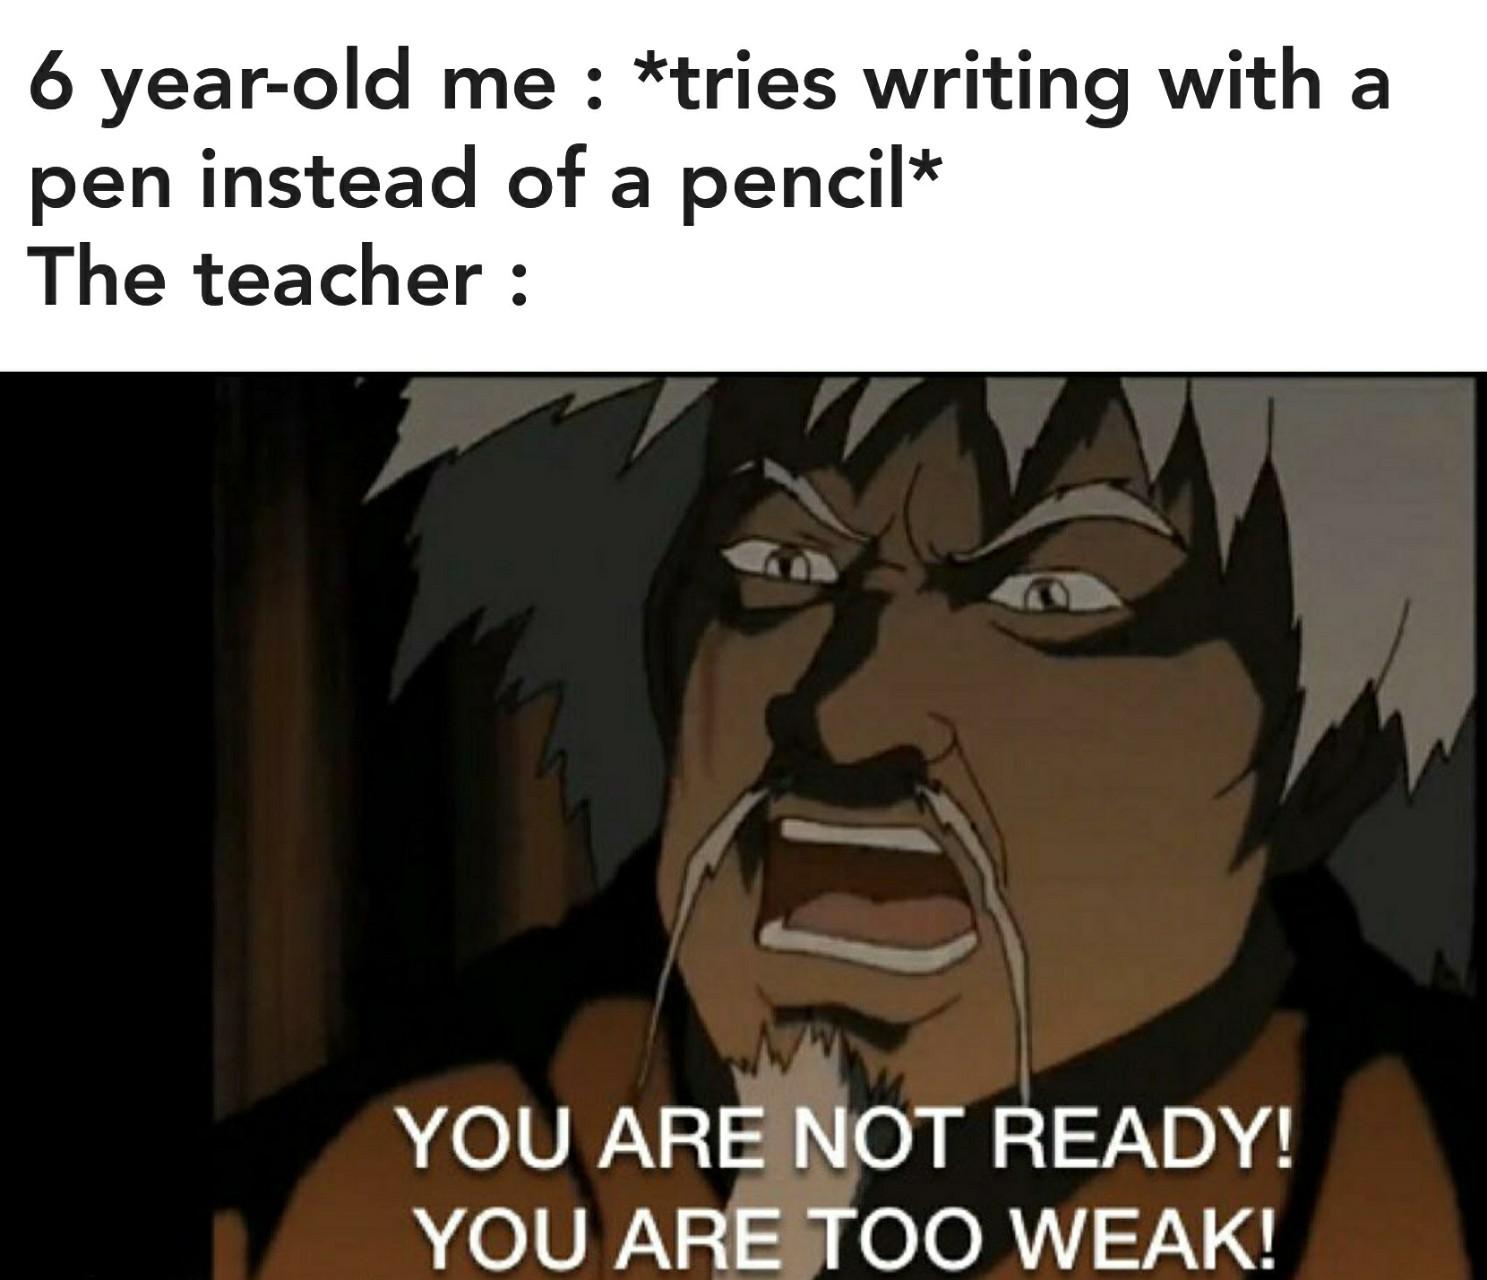 Dank, Jeong Jeong, ATLA, White Lotus, Aang Dank Memes Dank, Jeong Jeong, ATLA, White Lotus, Aang text: 6 year-old me : *tries writing with a pen instead of a pencil* The teacher : YOU ARE OT READY! YOU ARE TOO WEAK! 